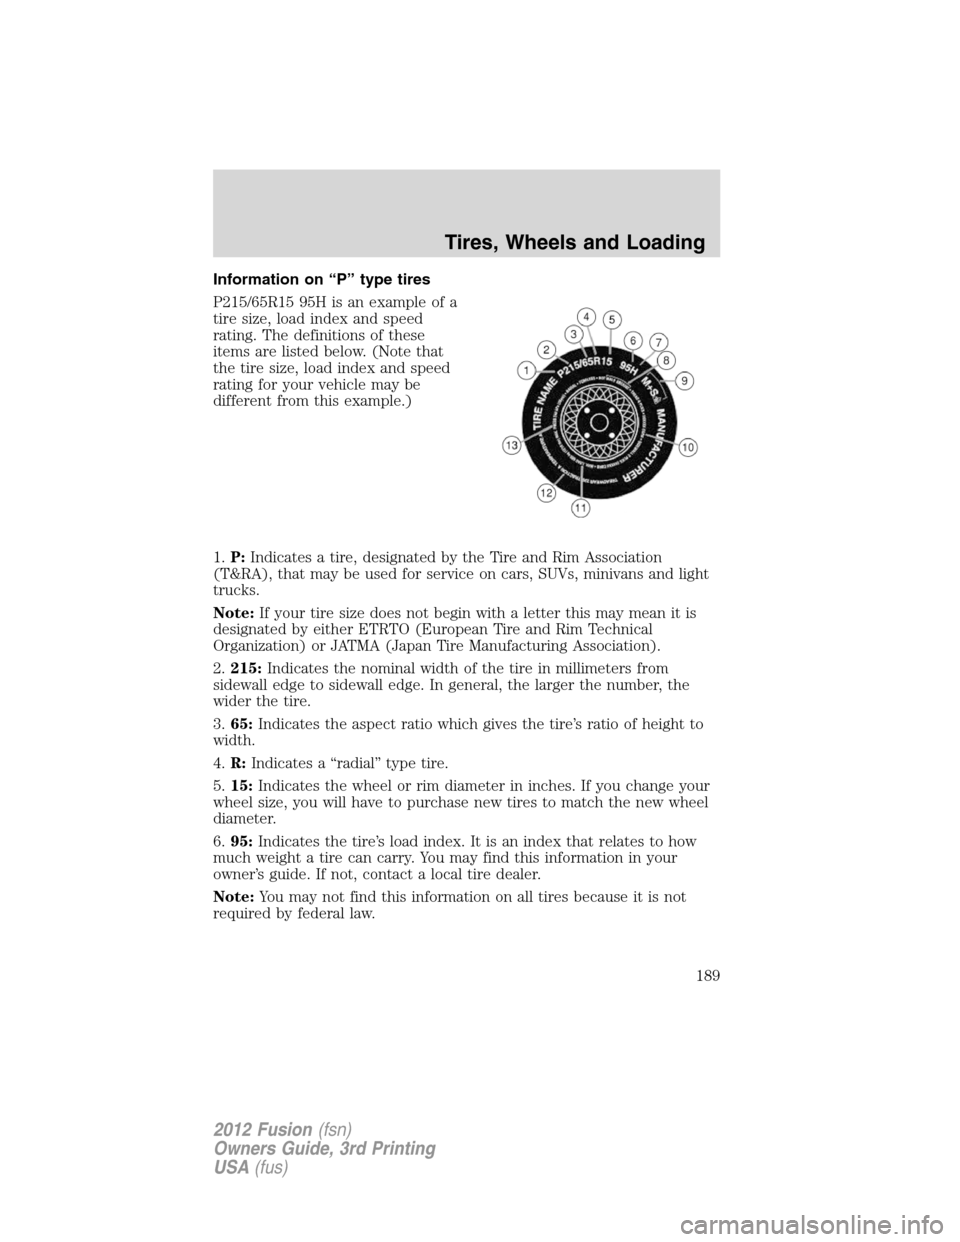 FORD FUSION (AMERICAS) 2012 1.G Owners Manual Information on “P” type tires
P215/65R15 95H is an example of a
tire size, load index and speed
rating. The definitions of these
items are listed below. (Note that
the tire size, load index and sp